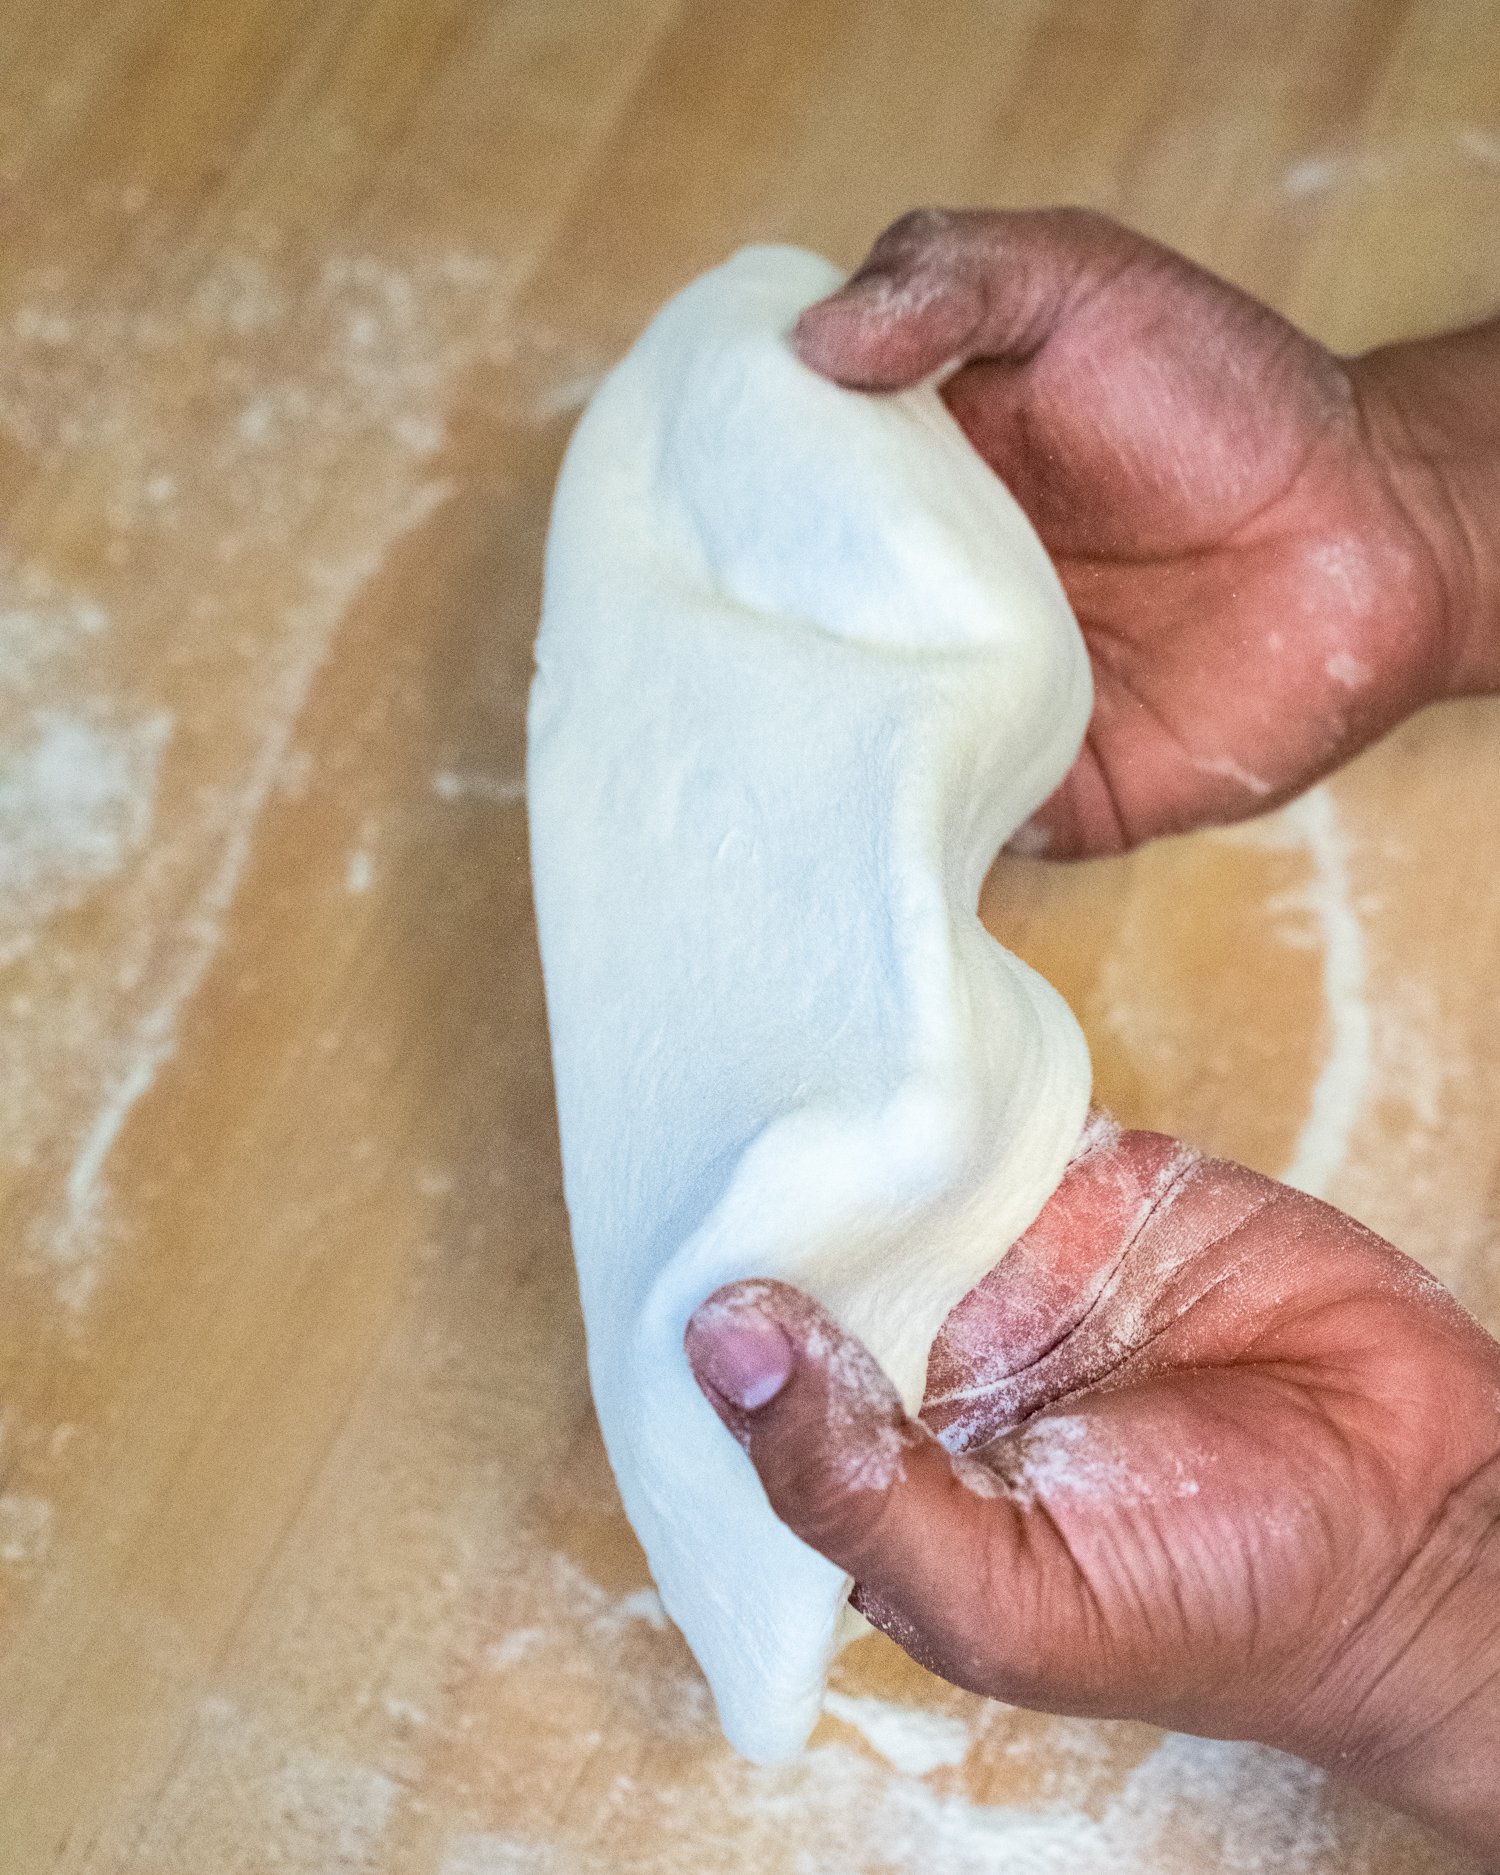  Our cold fermented dough has the elasticity and texture necessary for a great tasting pizza.  